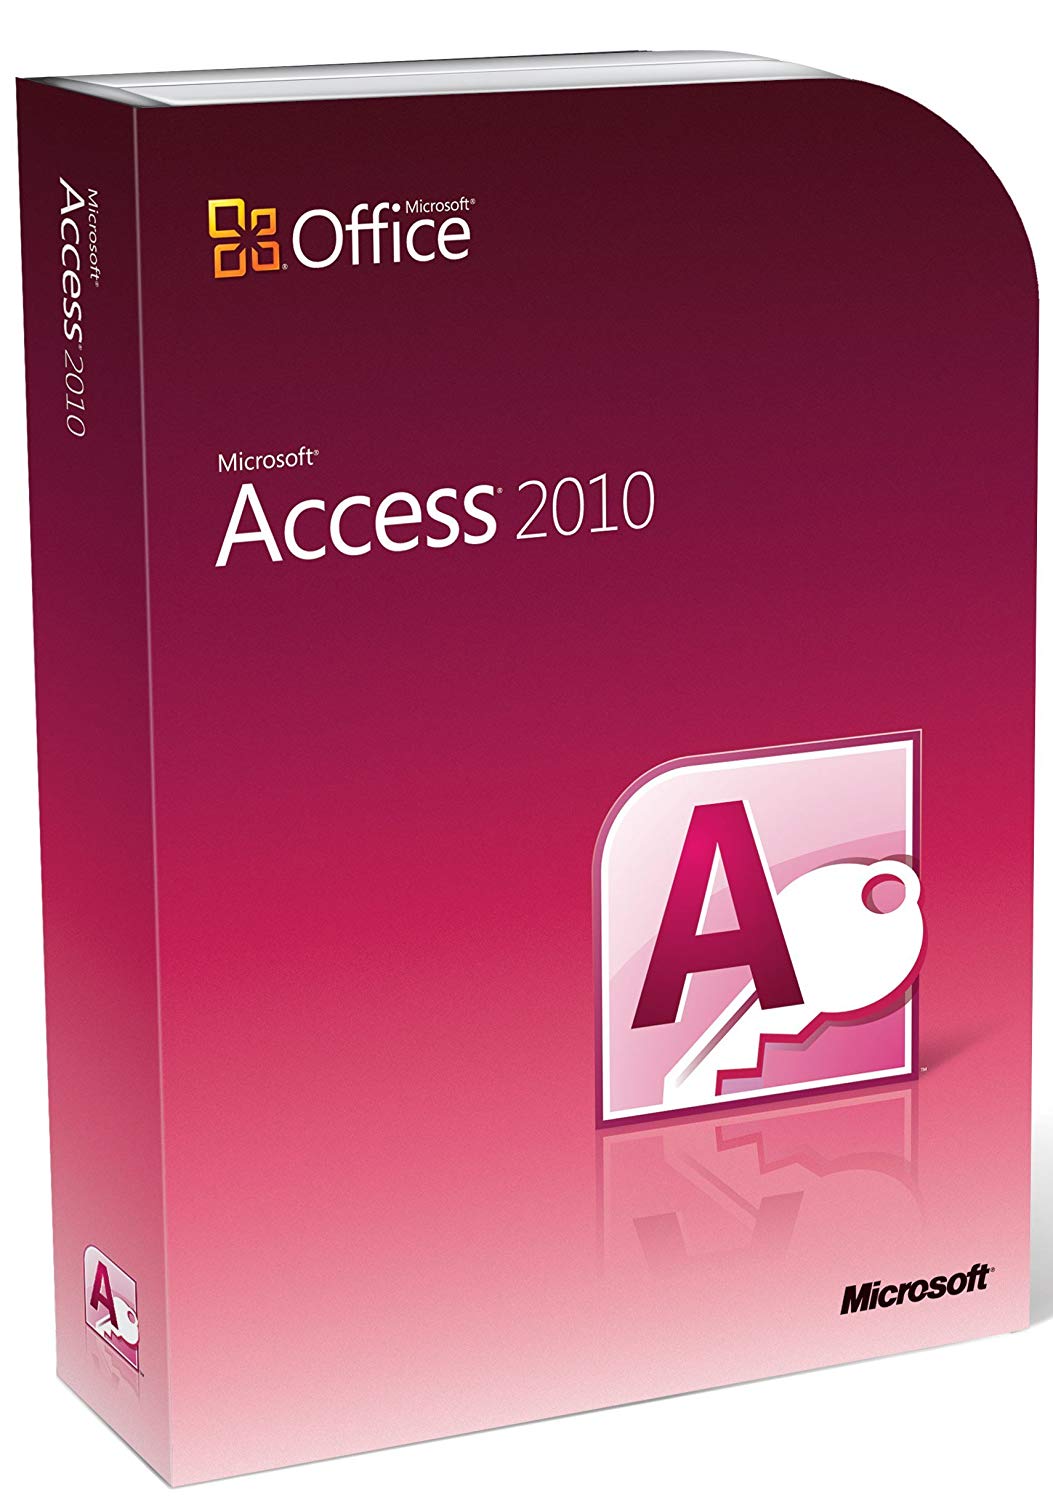 ms access free download 2010